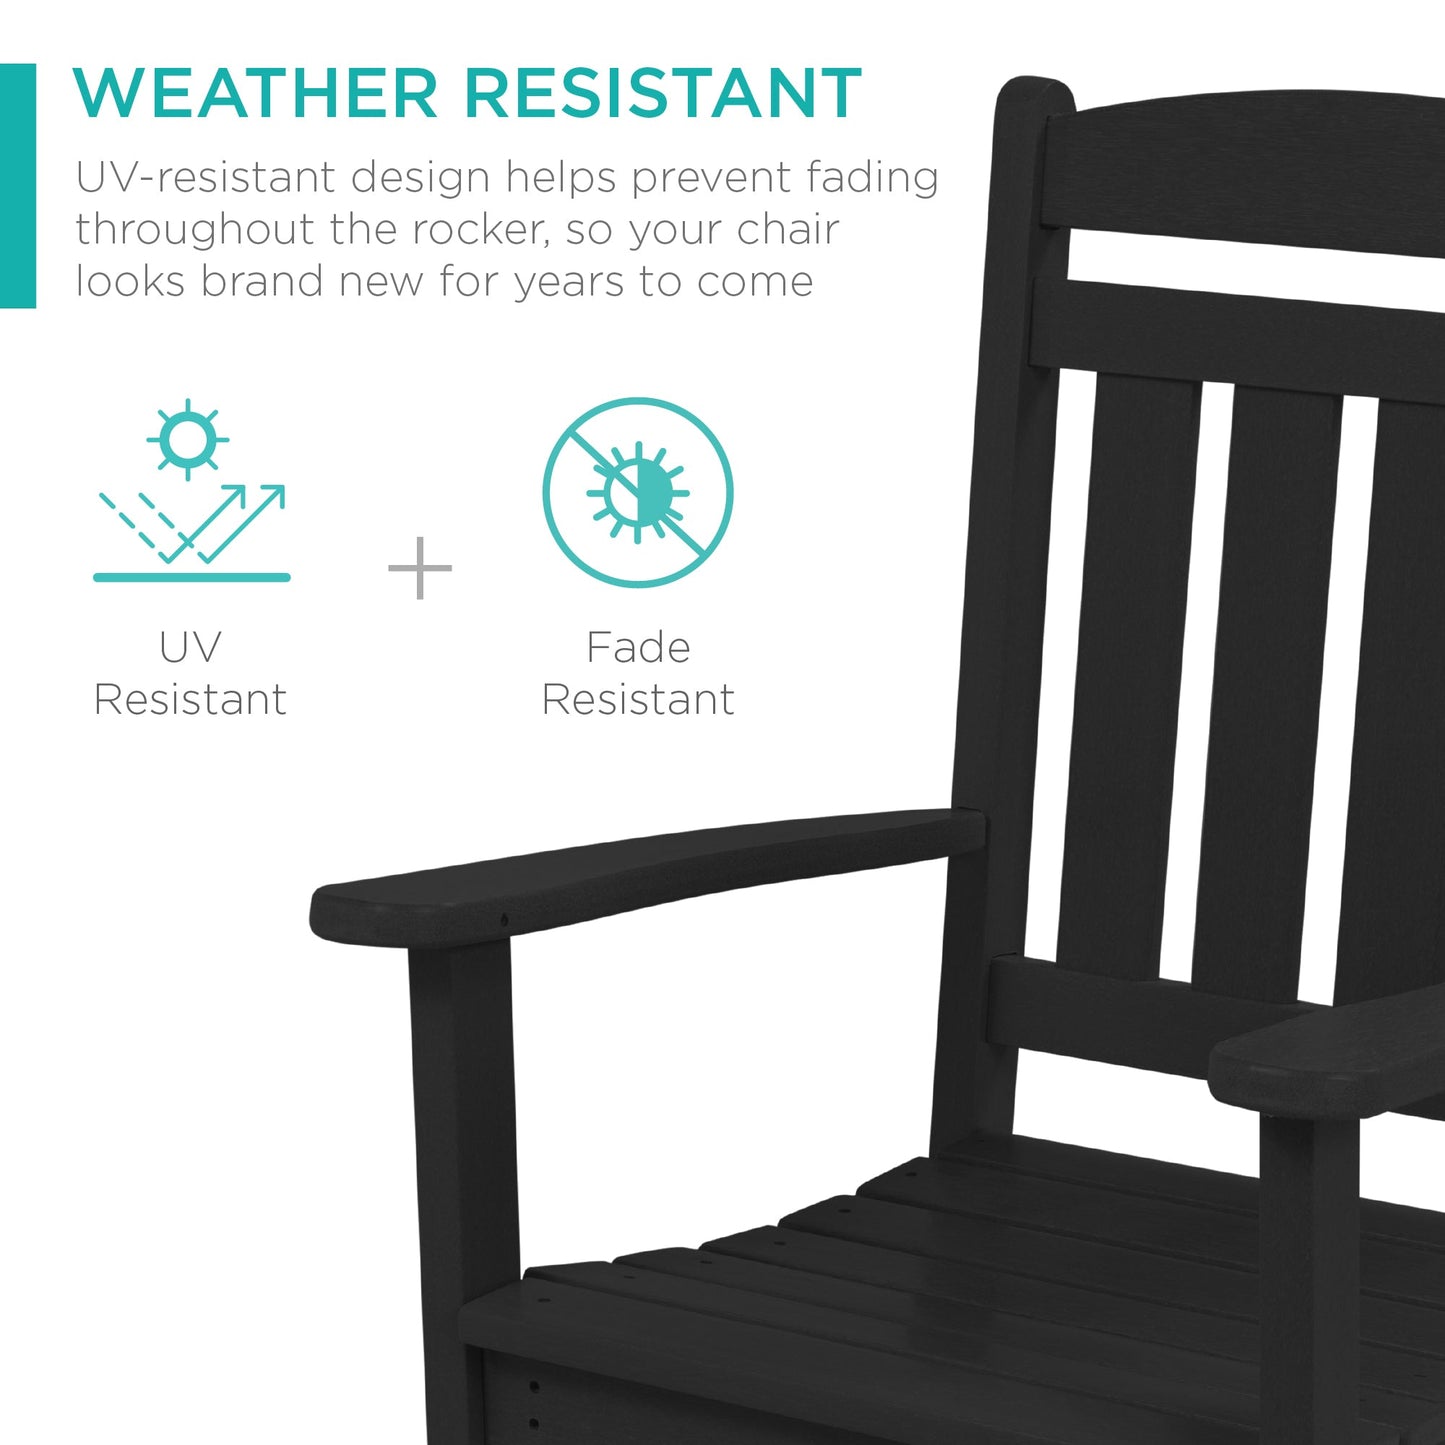 All-Weather Indoor Outdoor Porch Rocking Chair w/ 300lb Weight Capacity